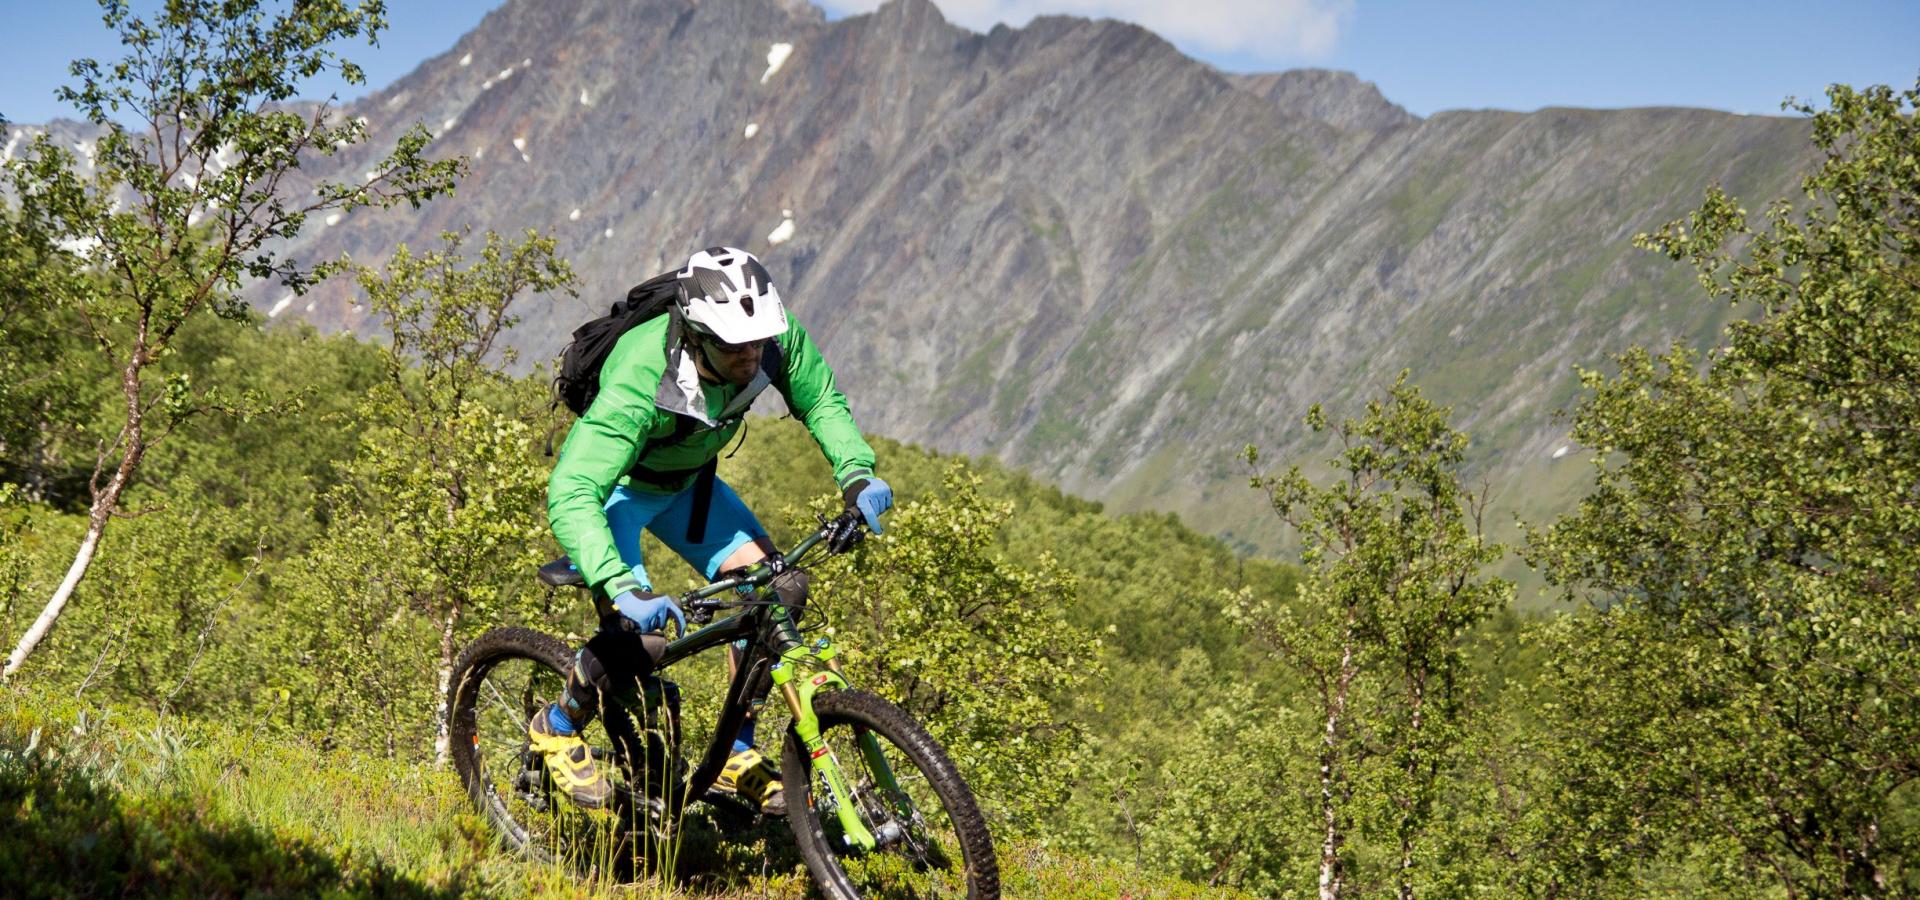 Mountain biker following a trail downwards, mountain in the background